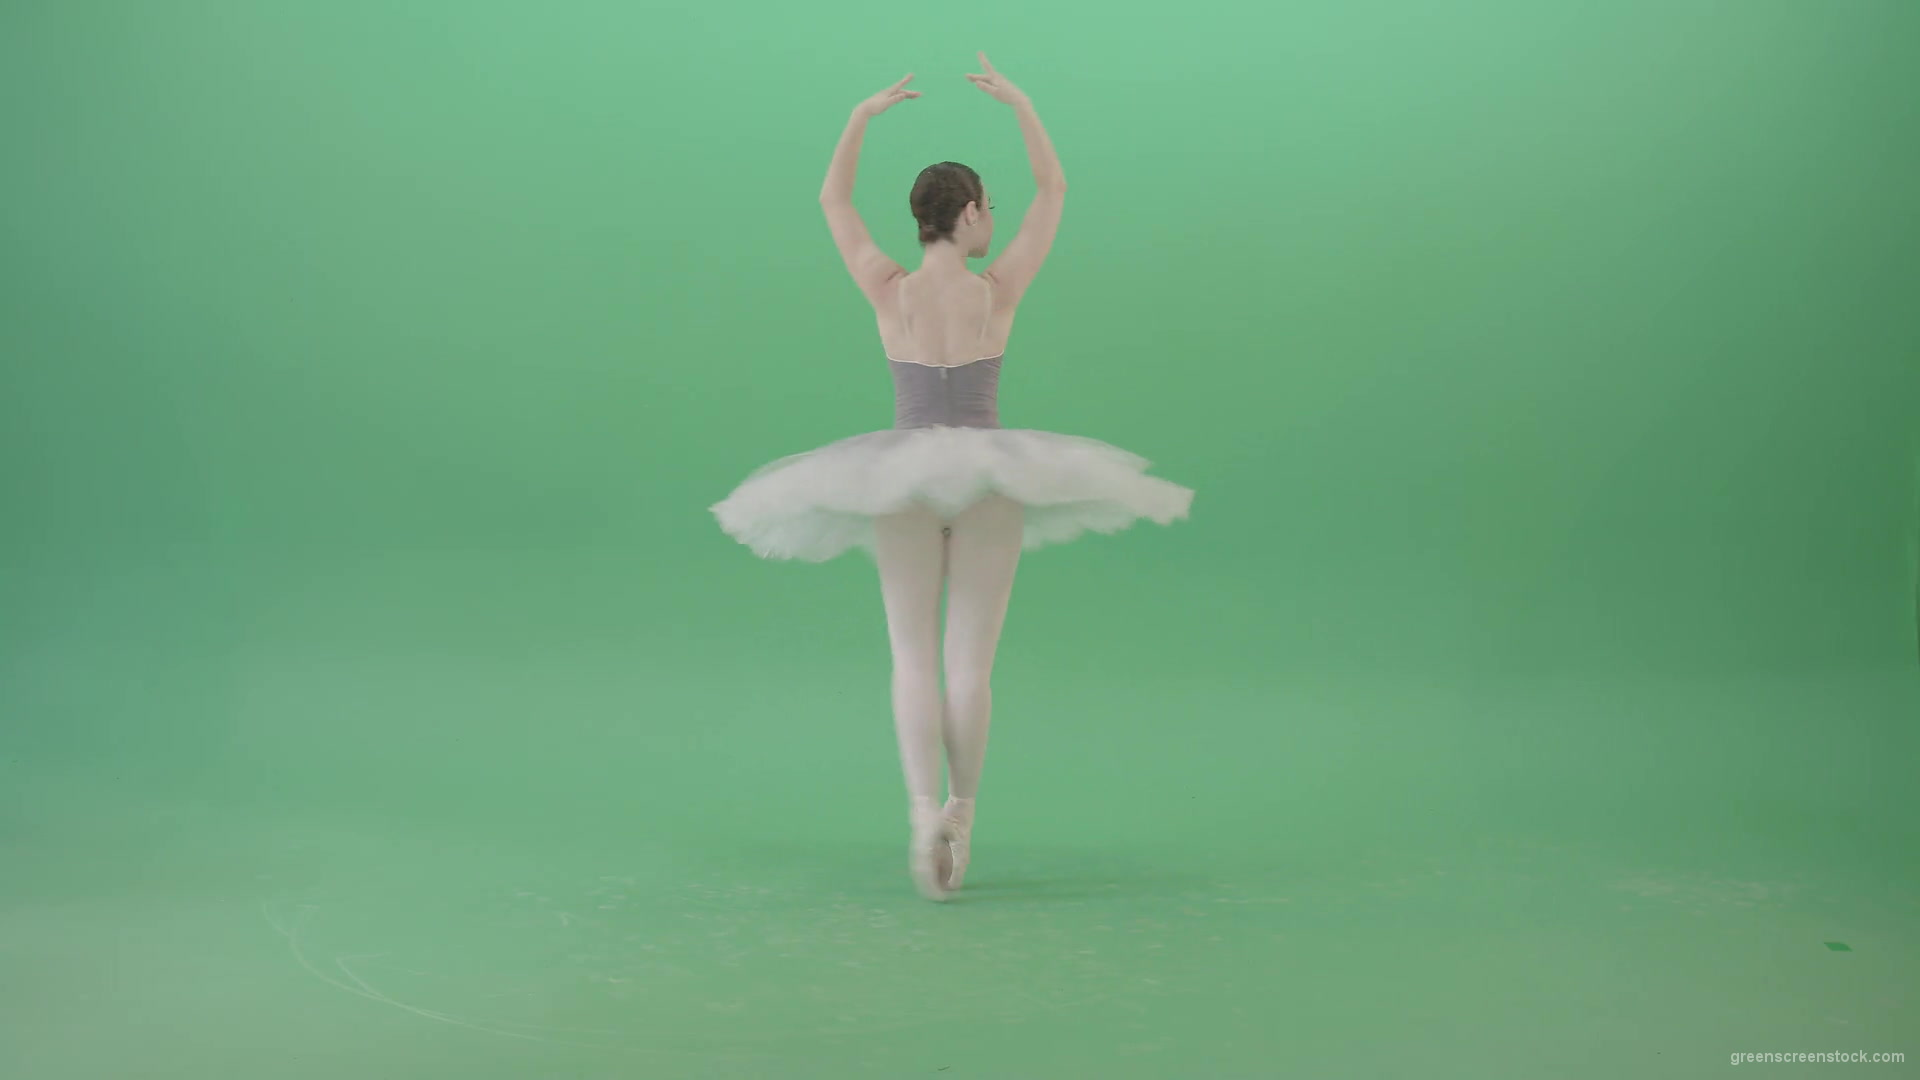 Smal-ballerina-girl-spinning-on-the-place-in-ballet-dance-art-on-green-screen-4K-Video-Footage-1920_002 Green Screen Stock